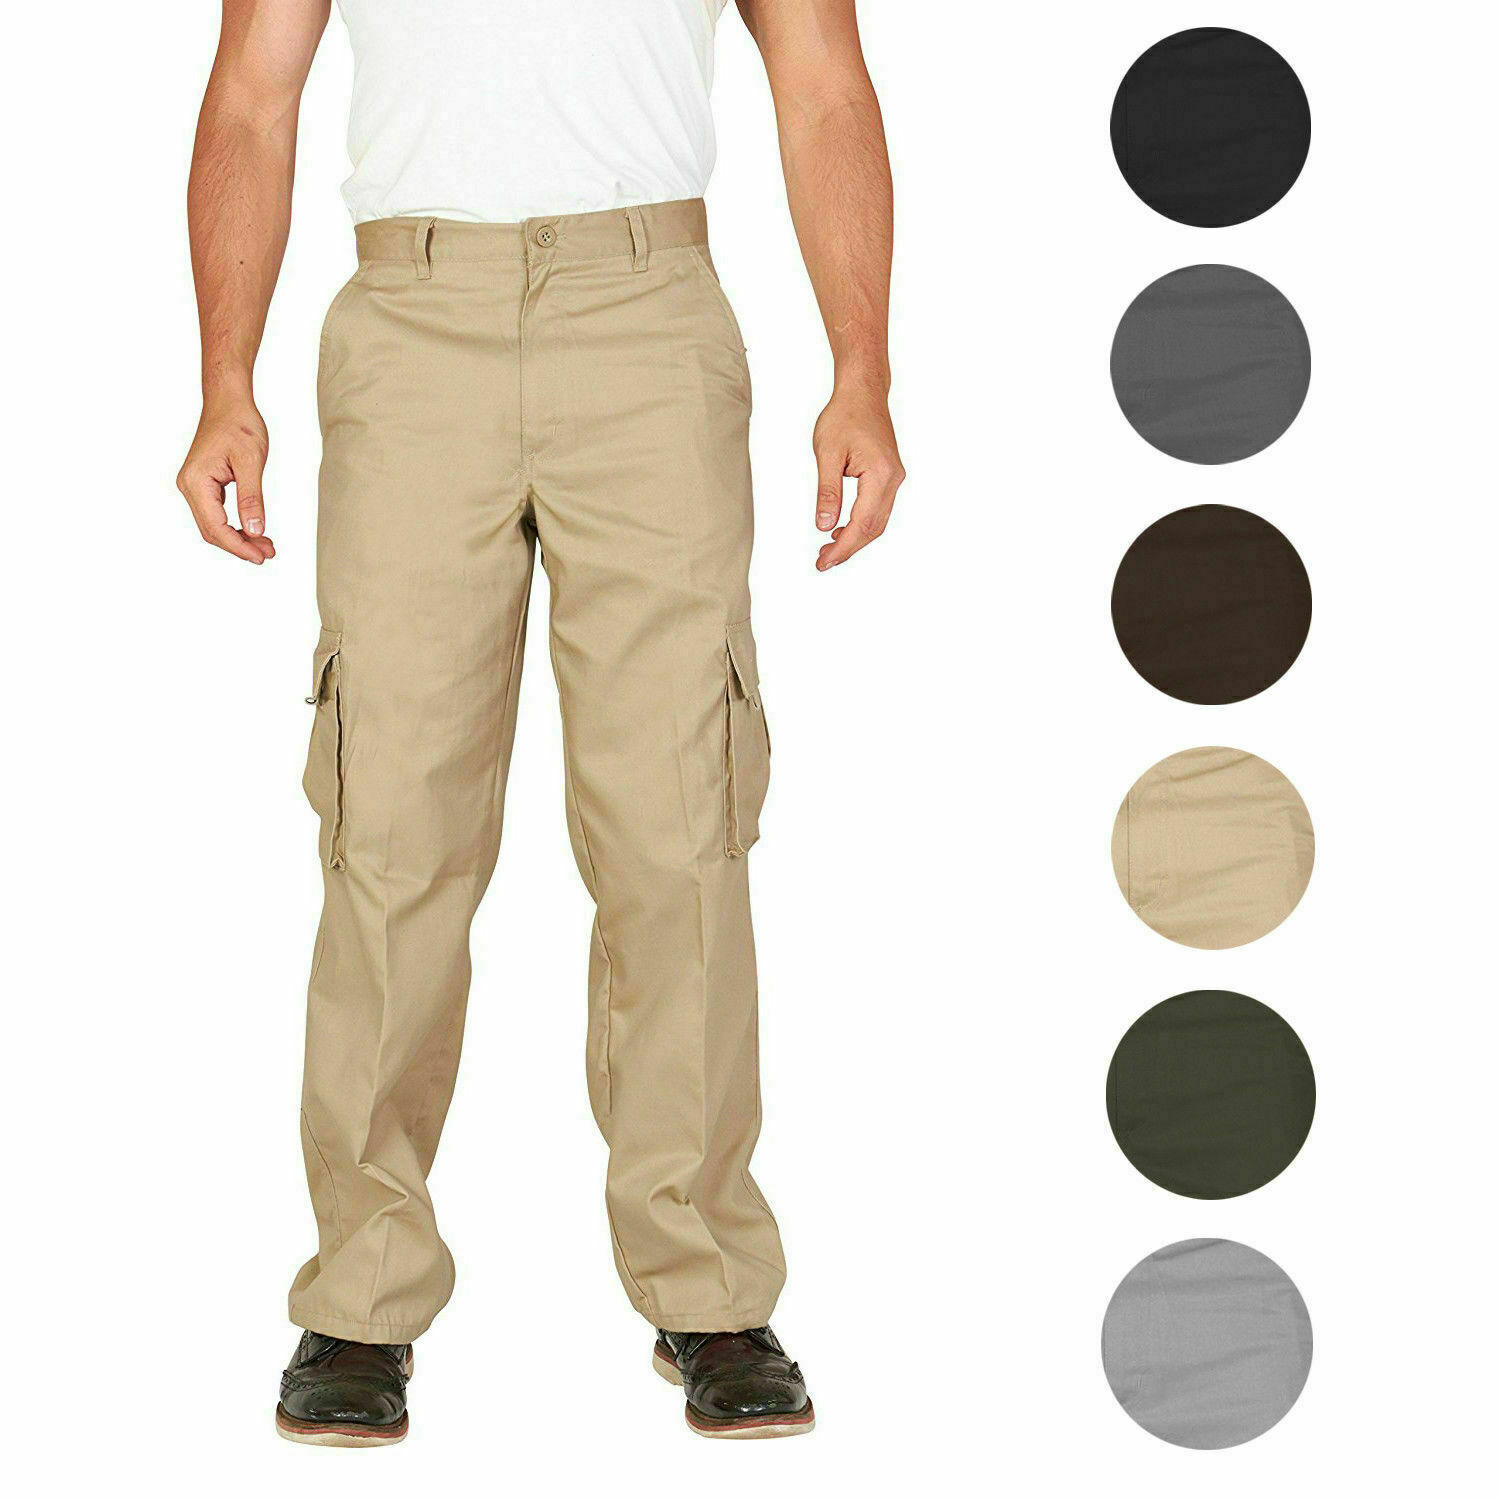 Primary image for Men's Tactical Combat Military Army Work Twill Cargo Pants Trousers